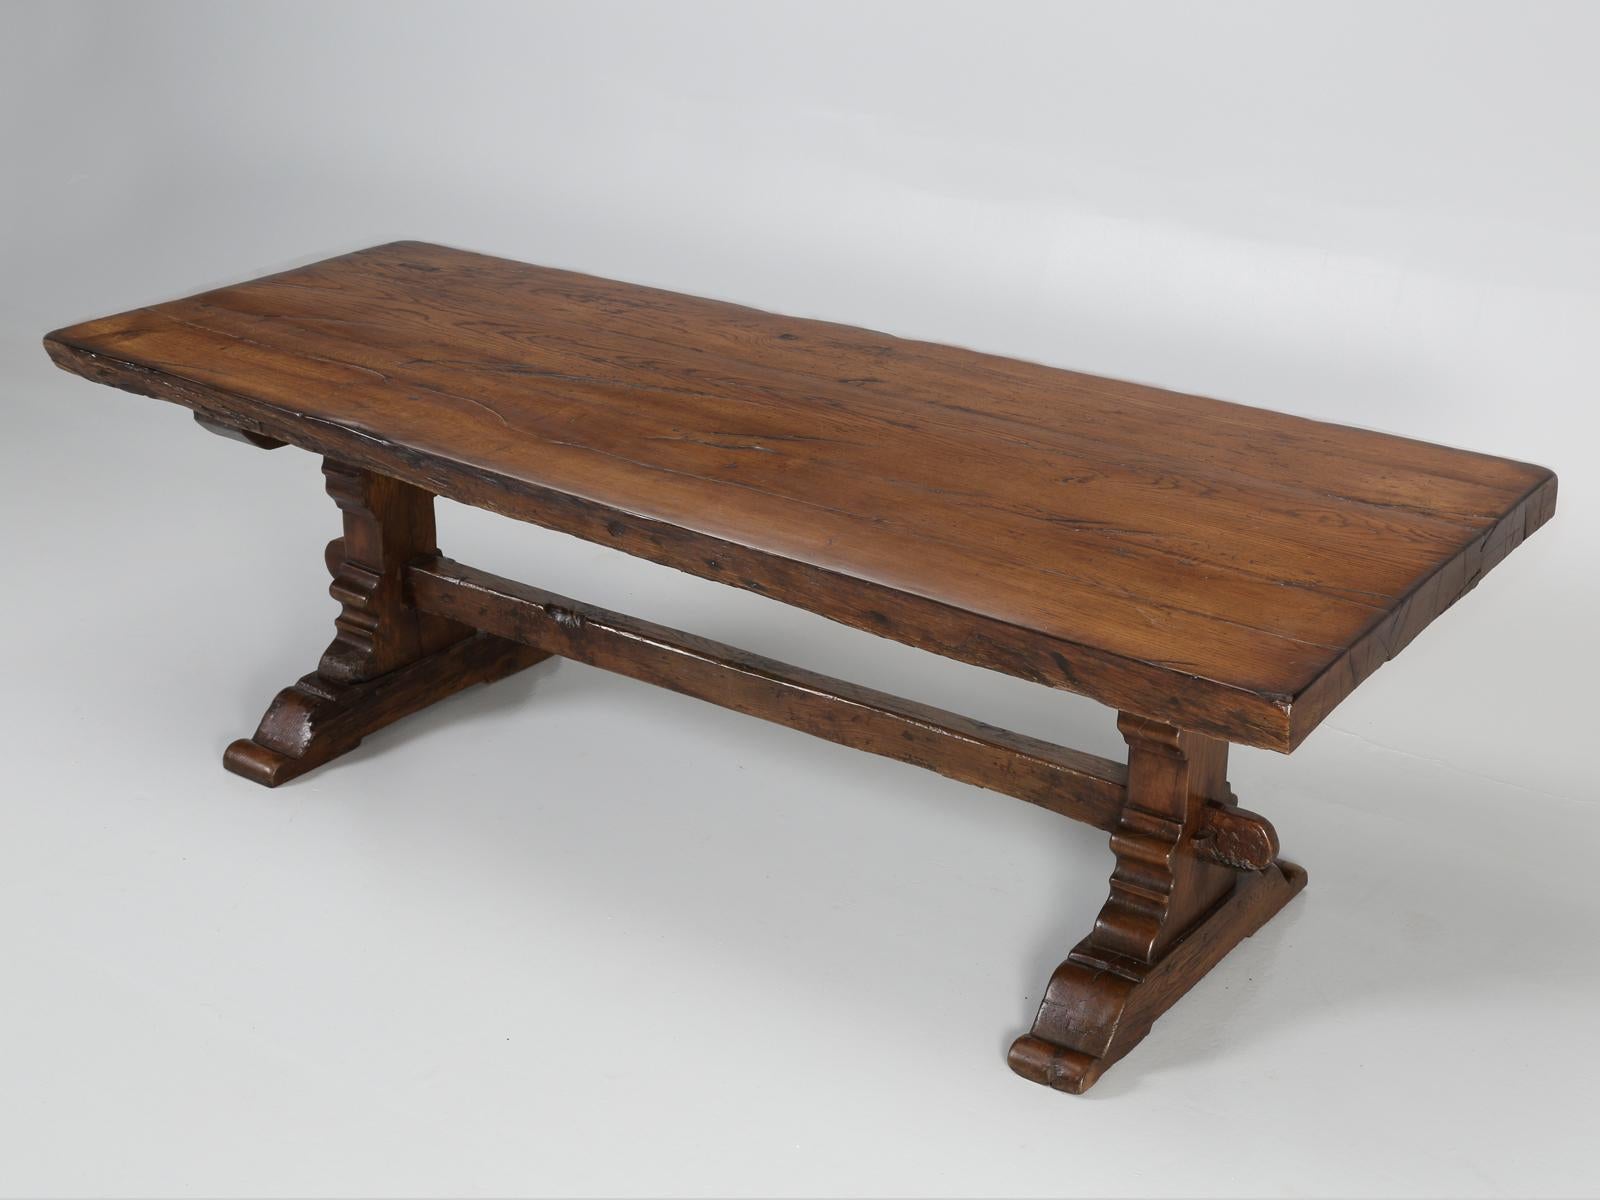 Difficult to determine, if this Antique French trestle dining table dates from the late 1700s or early 1800’s, but either way. It just exudes warmth and character, with its craftsmanship. The top of this antique French trestle dining table, was